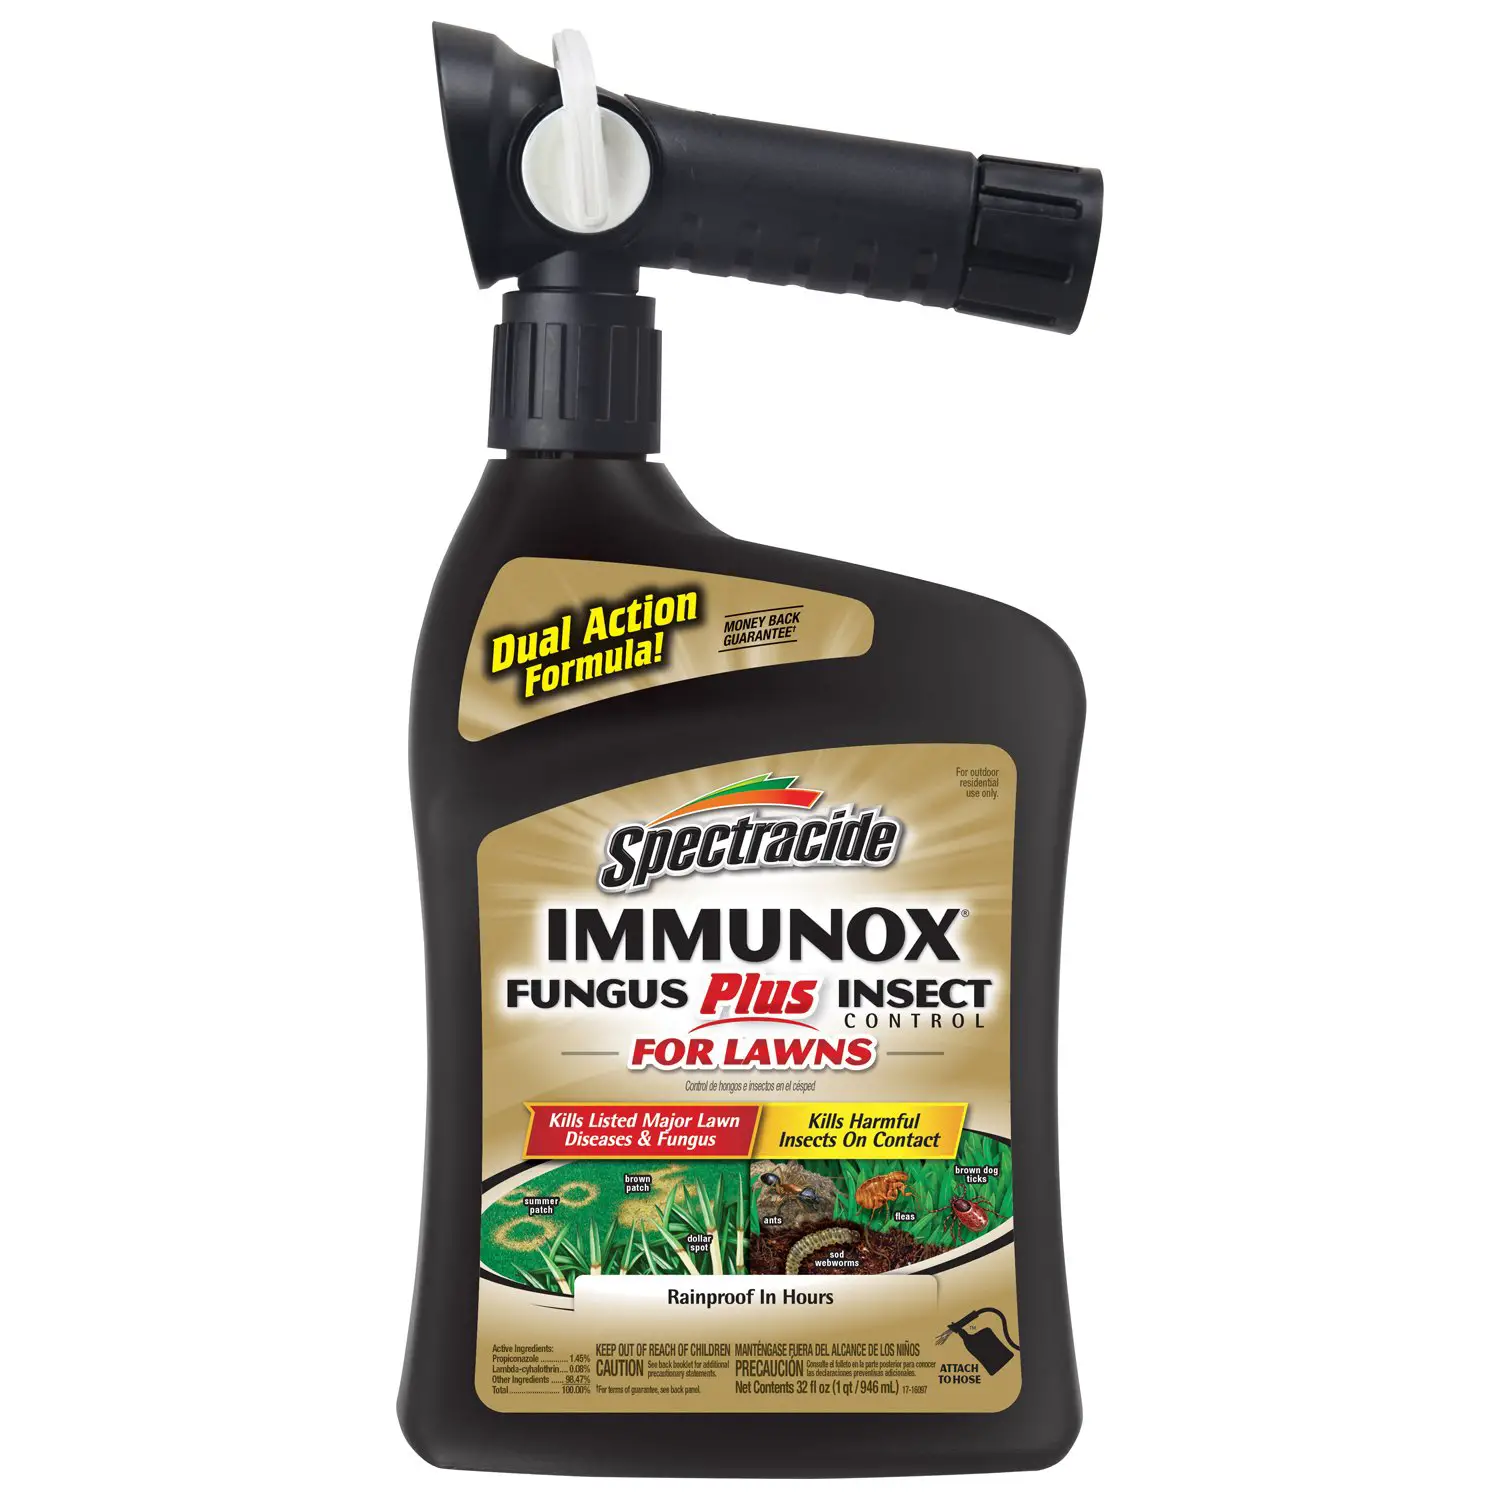 Amazon.com : Spectracide Immunox Fungus Plus Insect Control For Lawns ...